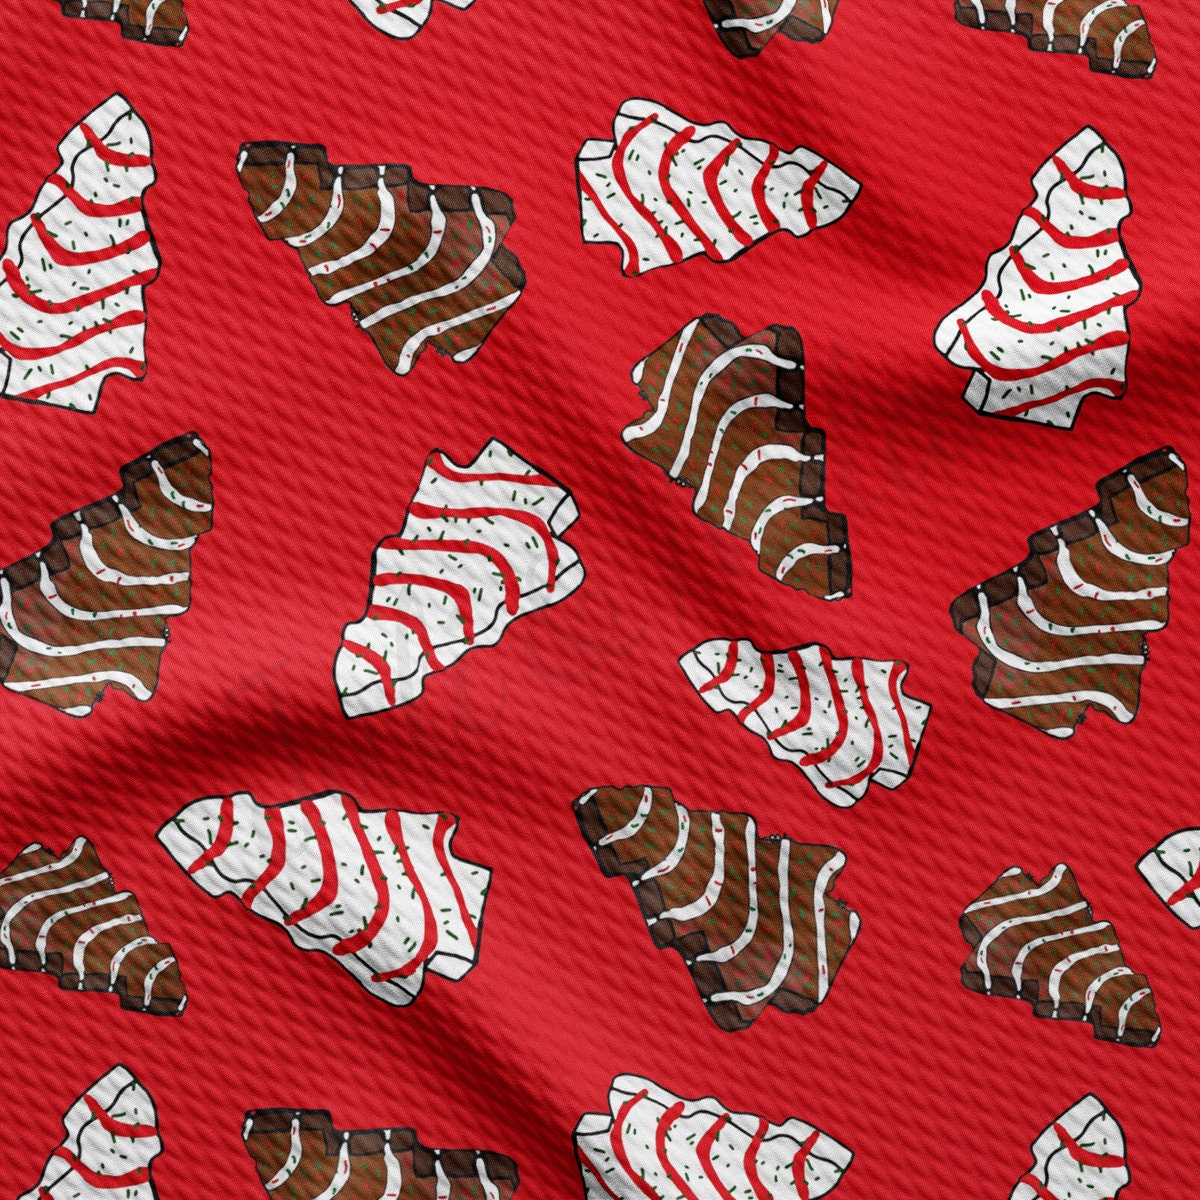 Christmas Printed Liverpool Bullet Textured Fabric by the yard 4Way Stretch Solid Strip Thick Knit Liverpool Fabric AA2144